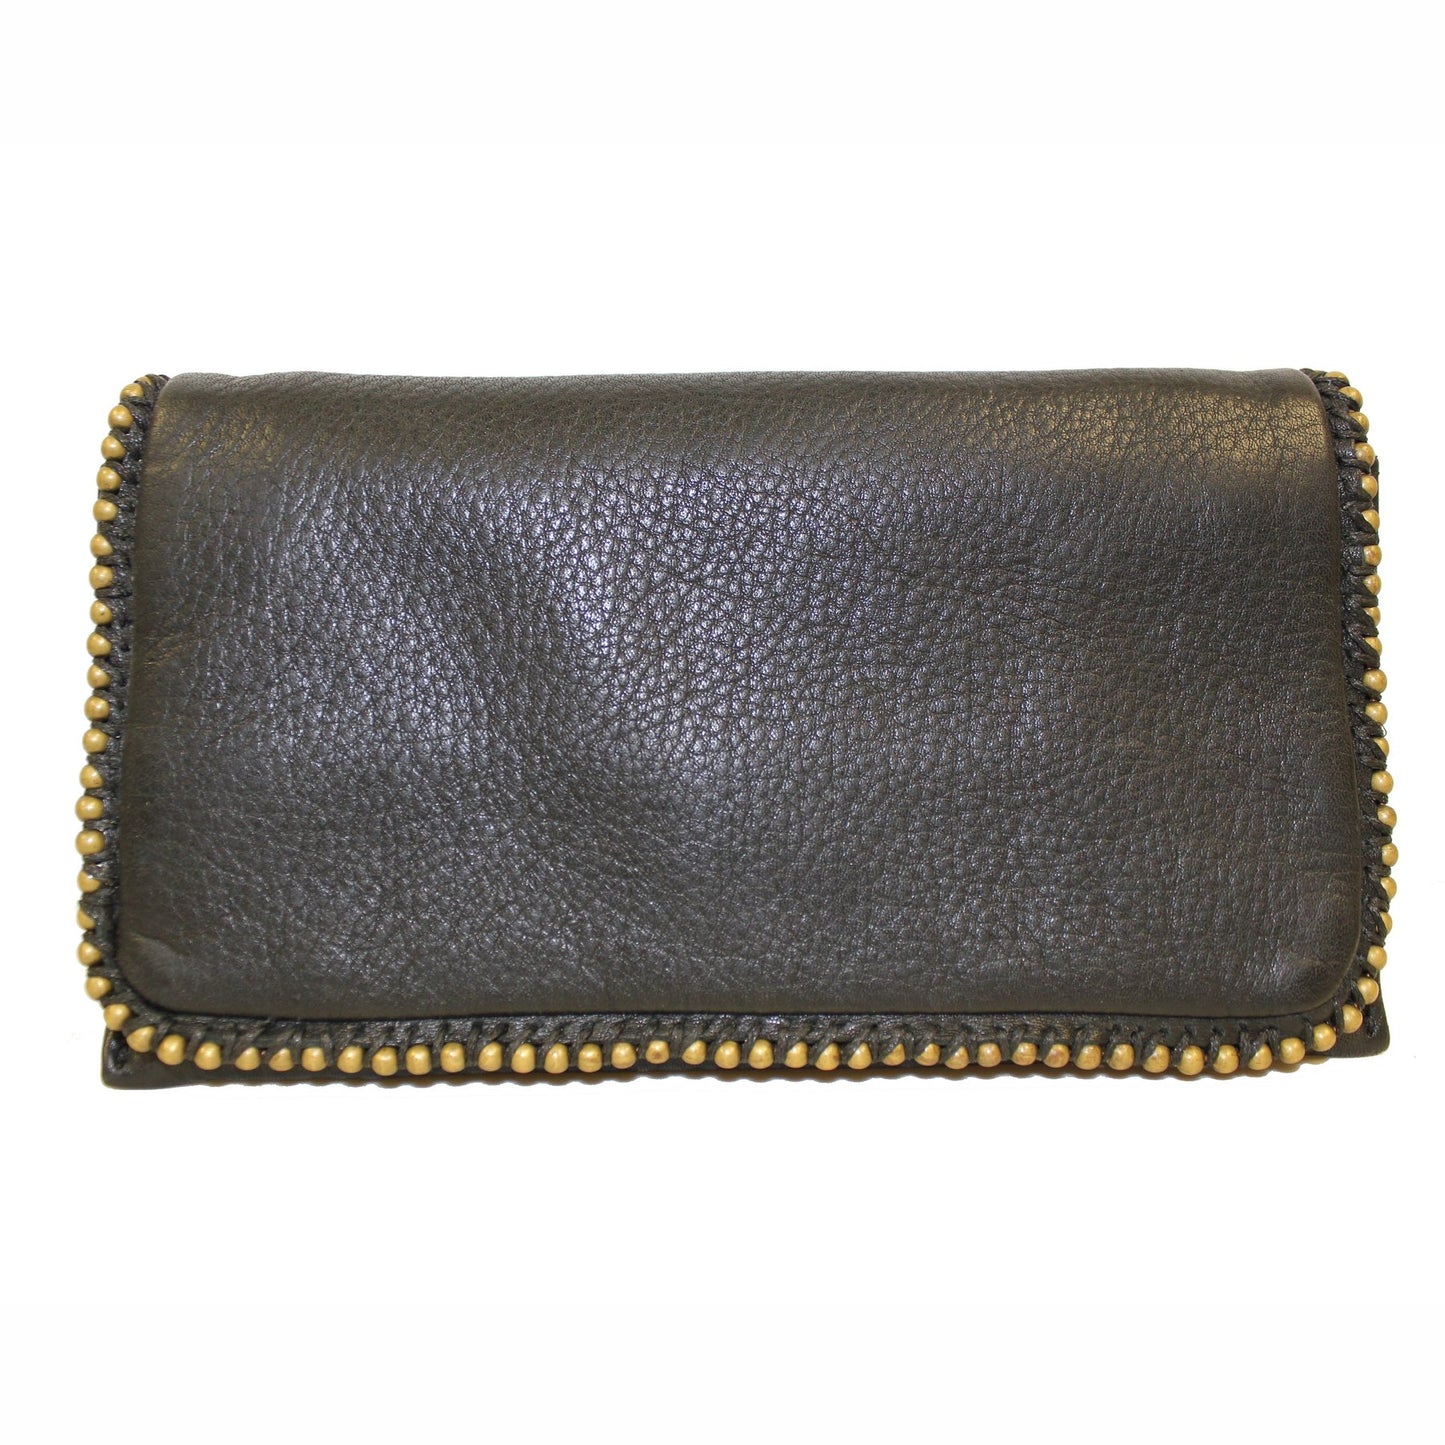 Naomi Leather Flapover Wallet with Decorative Edging